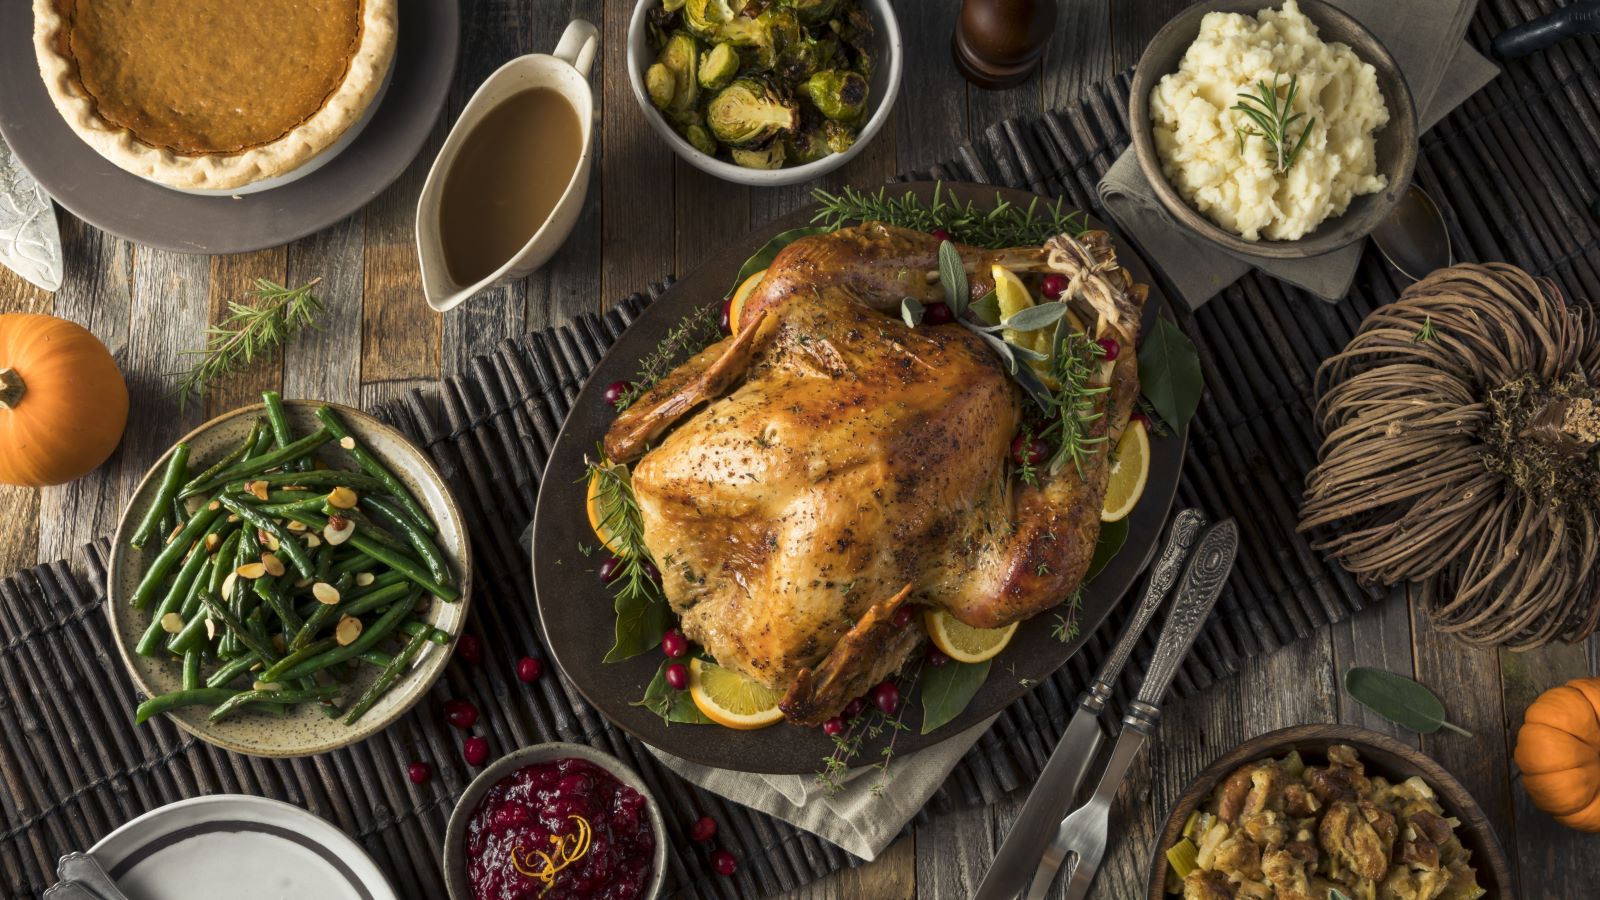 We asked a dietitian to share the top six healthy Thanksgiving foods to add to your menu this year. Here's what she had to say.